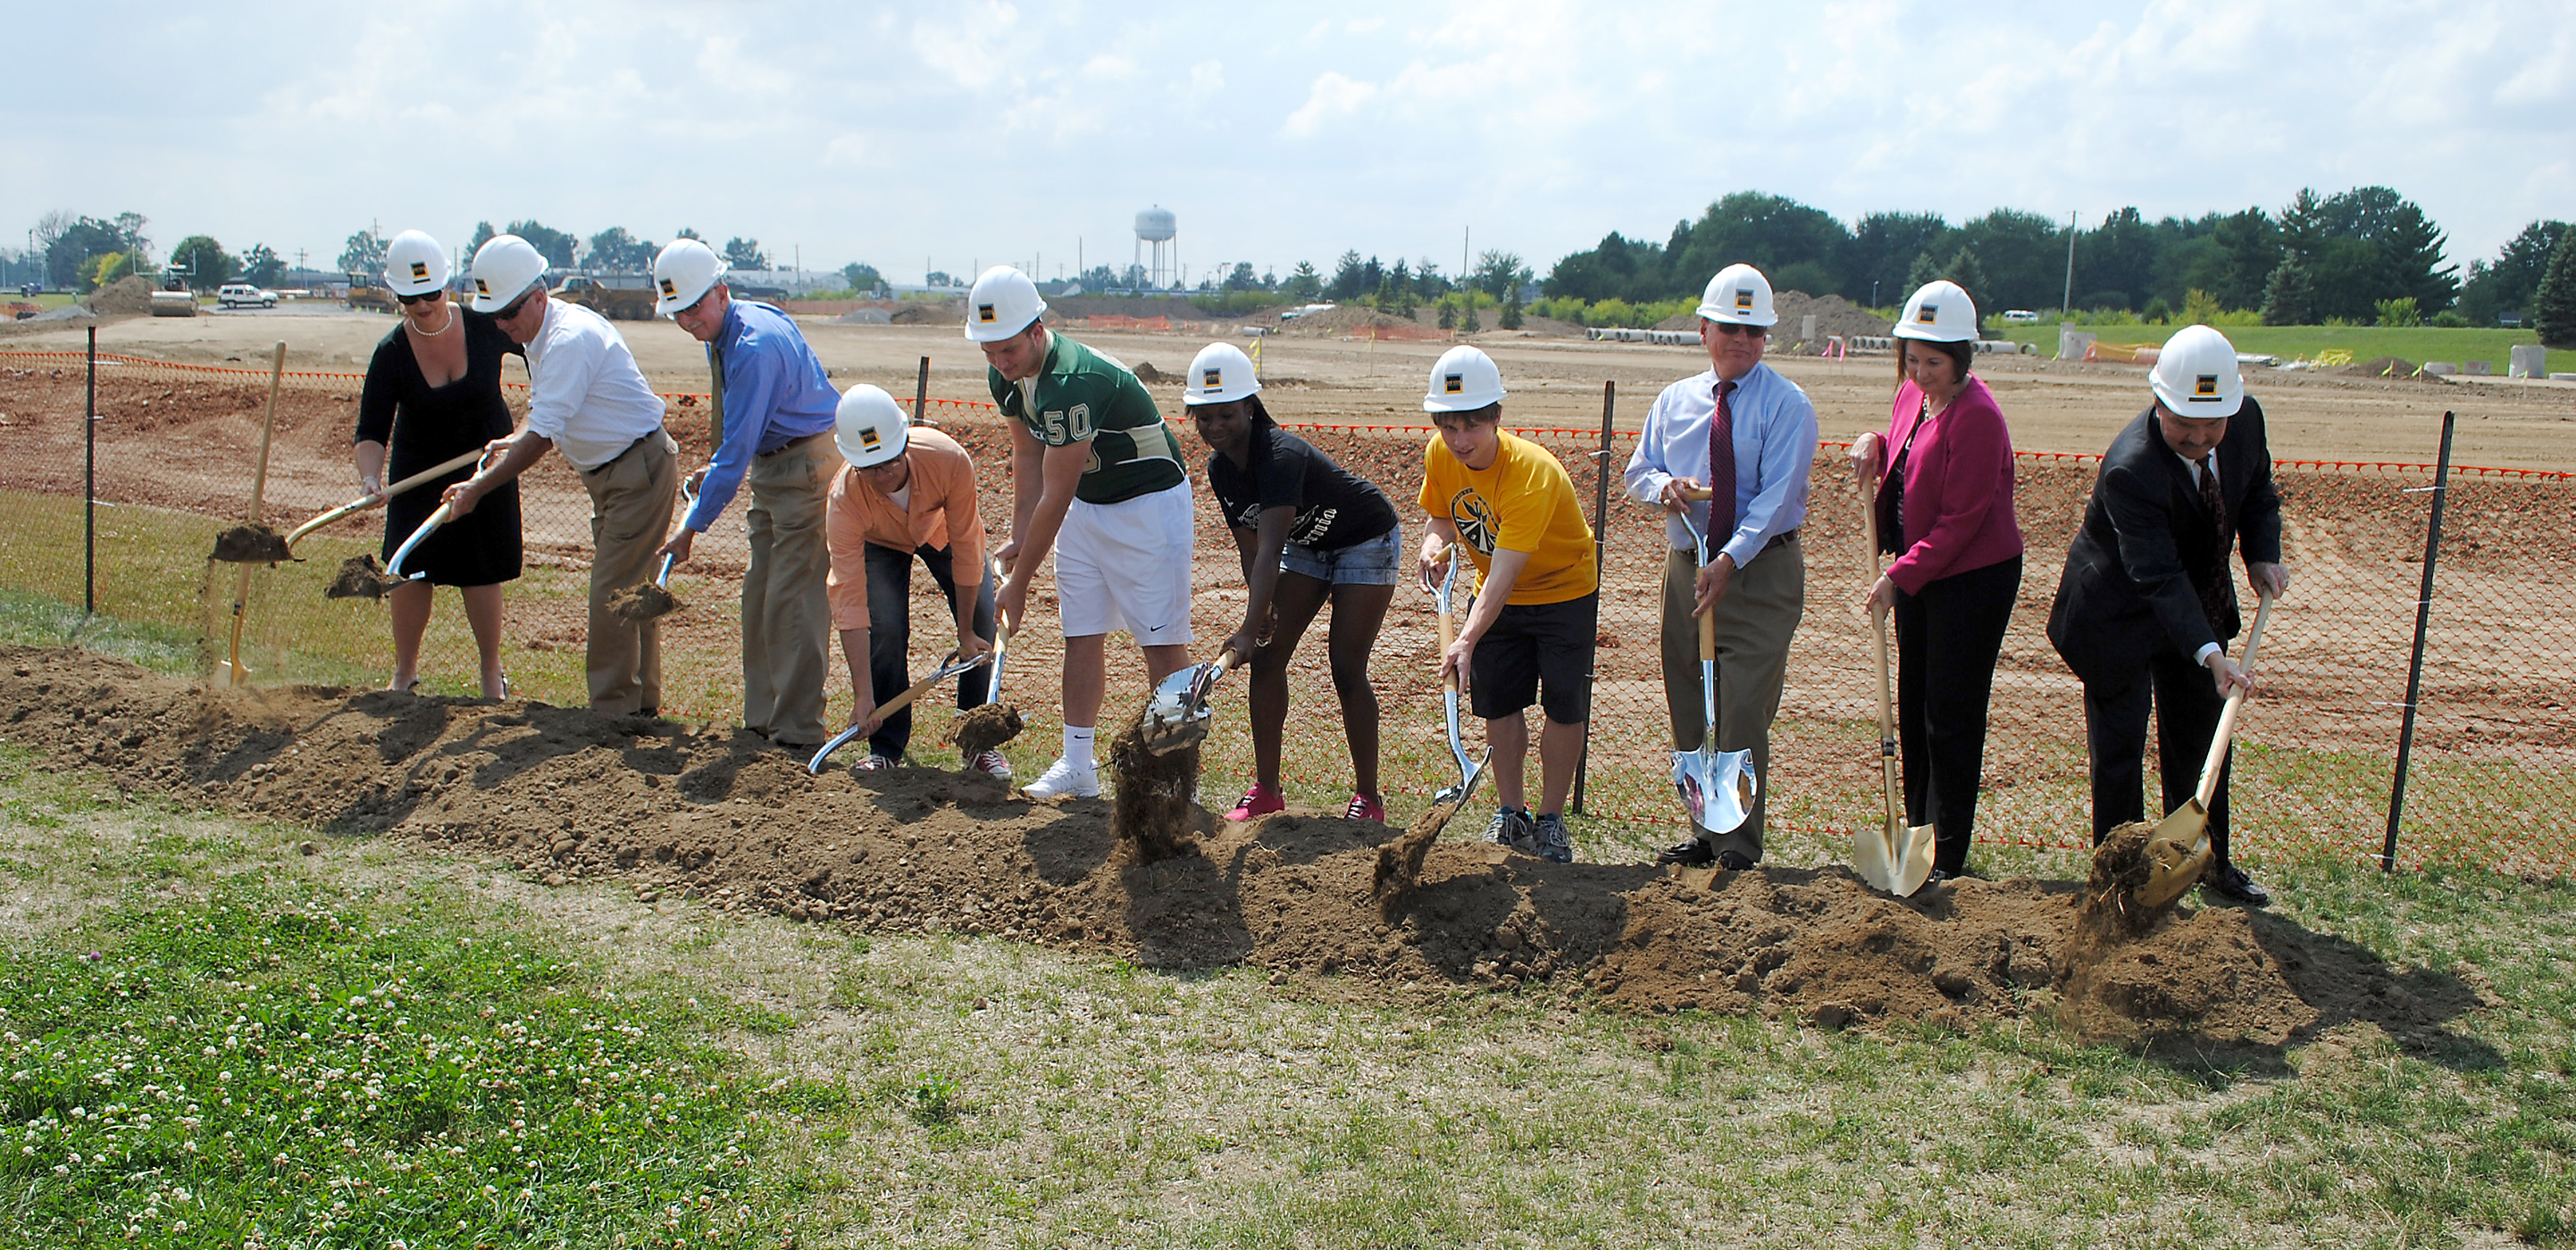 From left: Westfield High School Principal Dr. Stacy McGuire, Mayor Andy Cook, Westfield Washington Schools Supt. Dr. Mark Keen, WHS students Aaron Smith, Ryan Pape, Karen Hubbard and Johnny Crawford, Westfield City Council President Jim Ake, Riverview Health Chief Financial Officer Brenda Baker and Riverview Health COO Larry Christman break ground on the new community stadium Aug. 18.